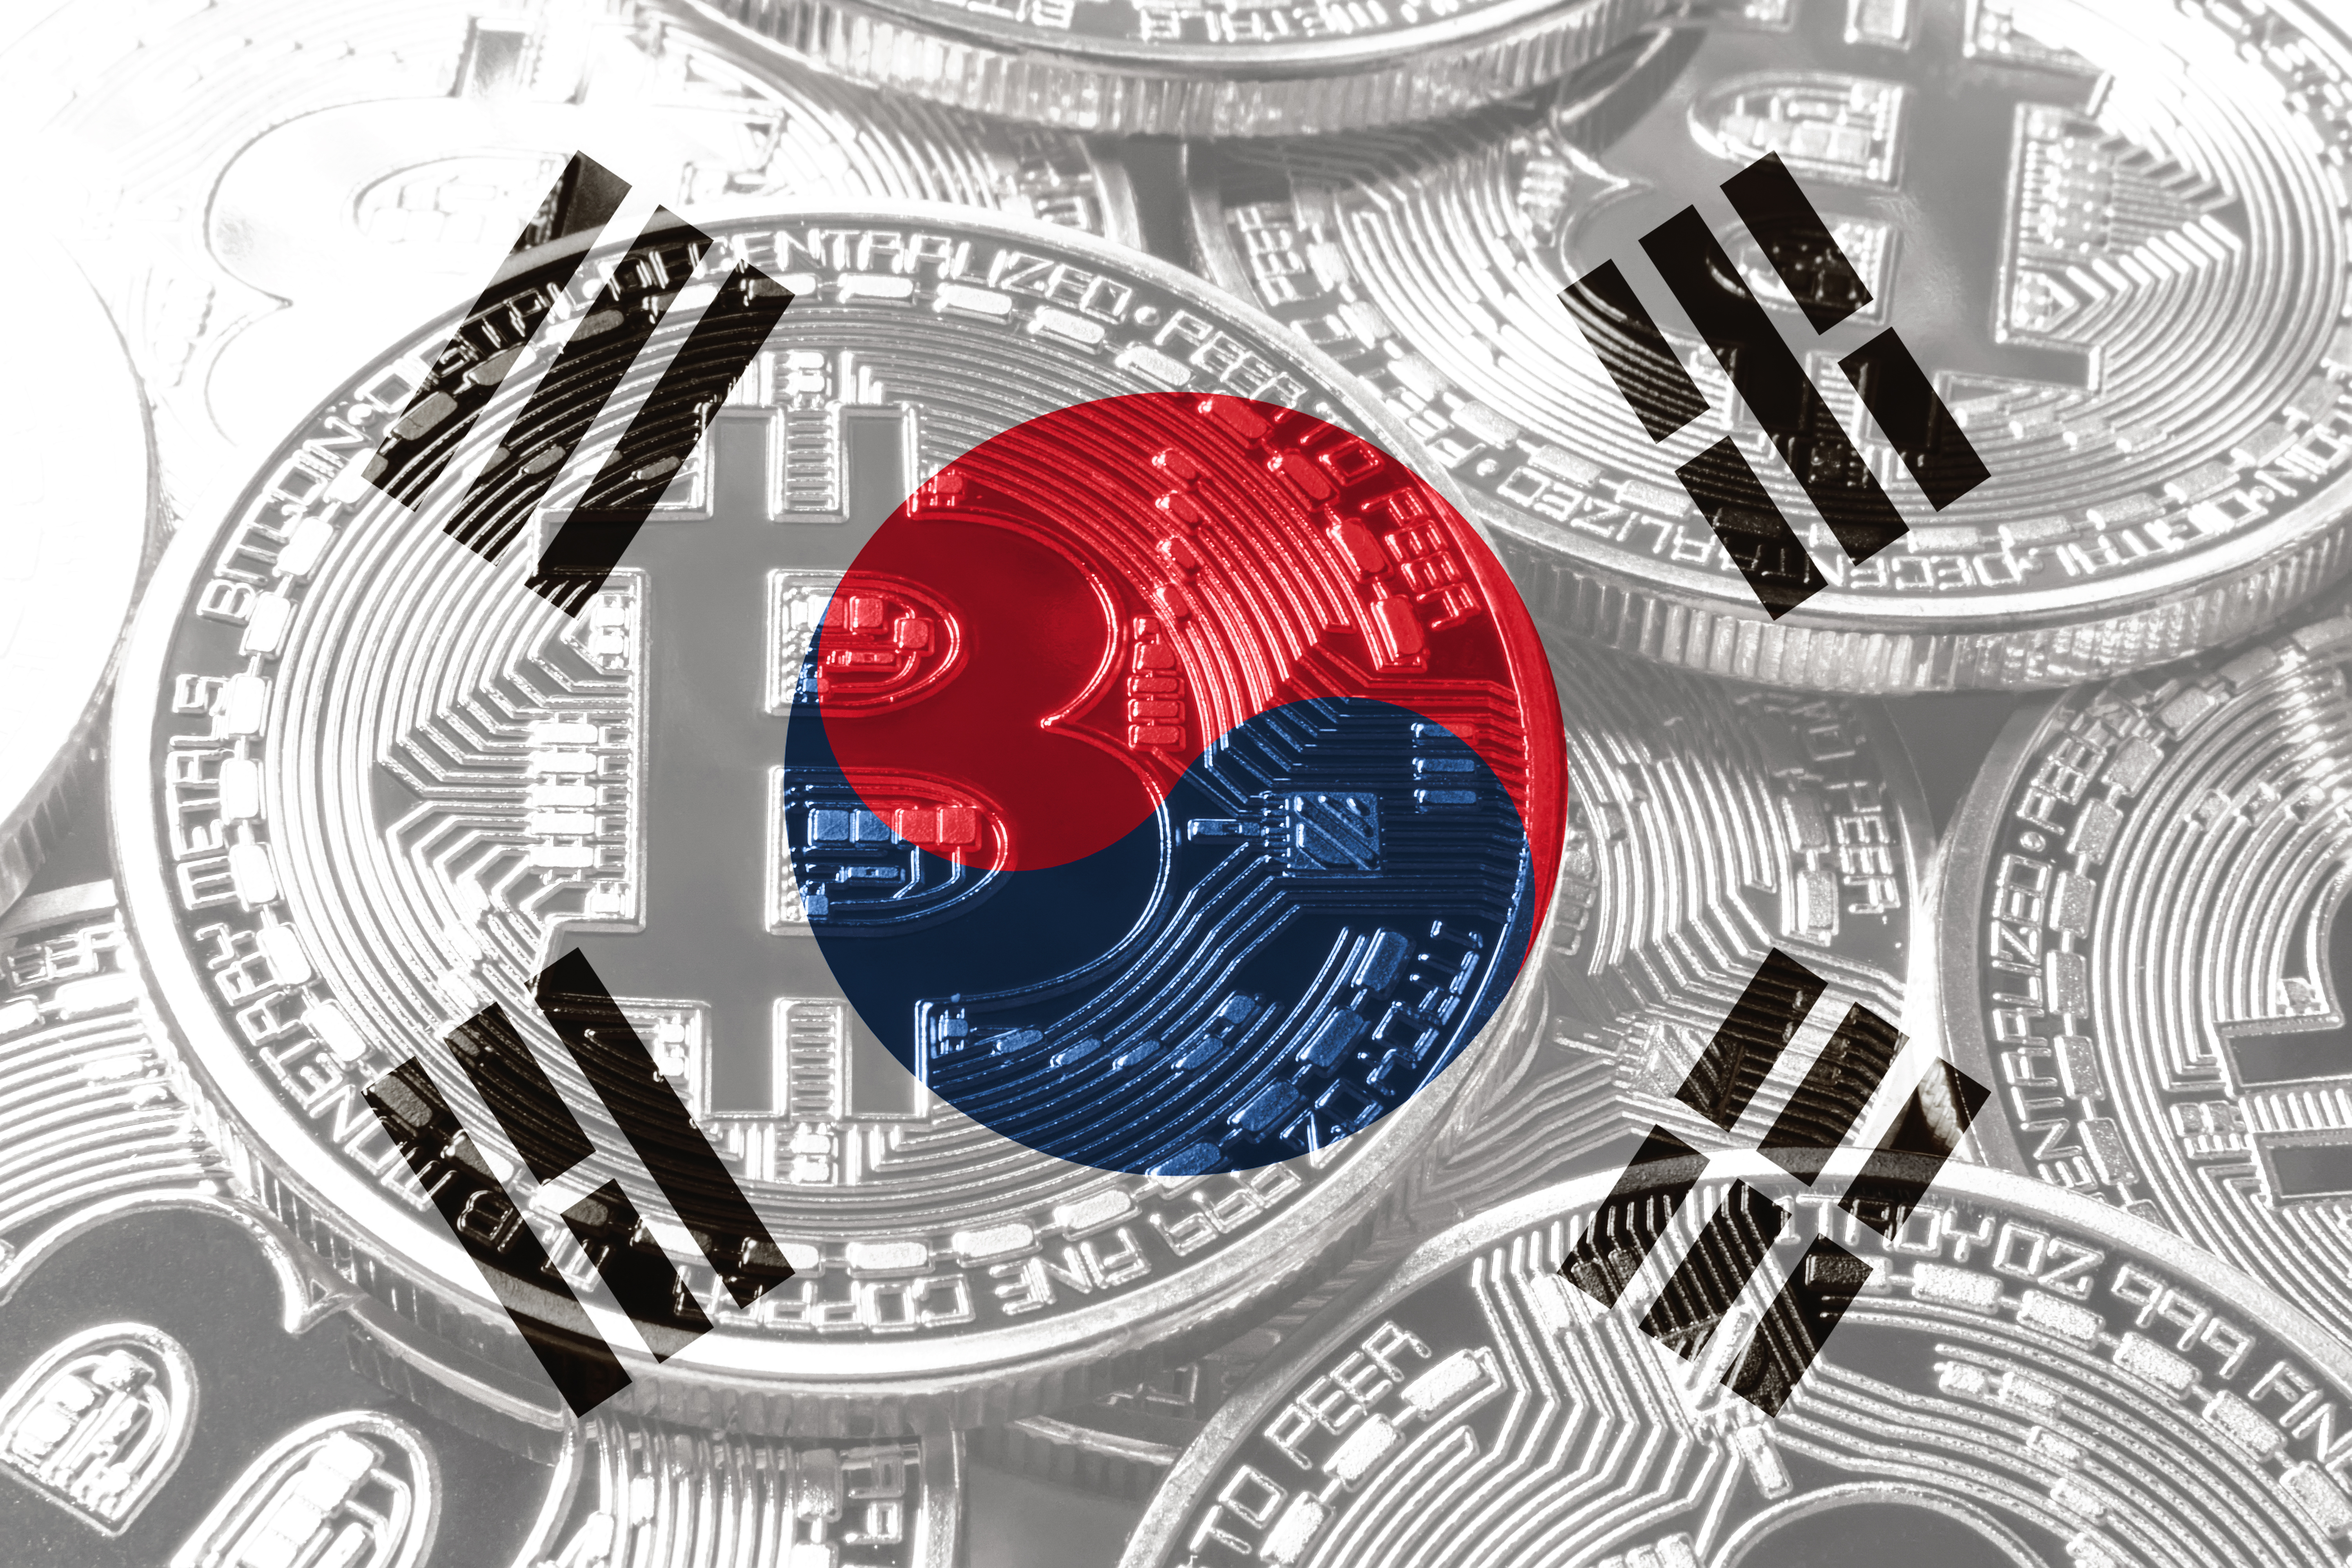 S Korean Regulators Draft New Crypto Laws – to Prevent More FTX and Terra ‘Incidents’